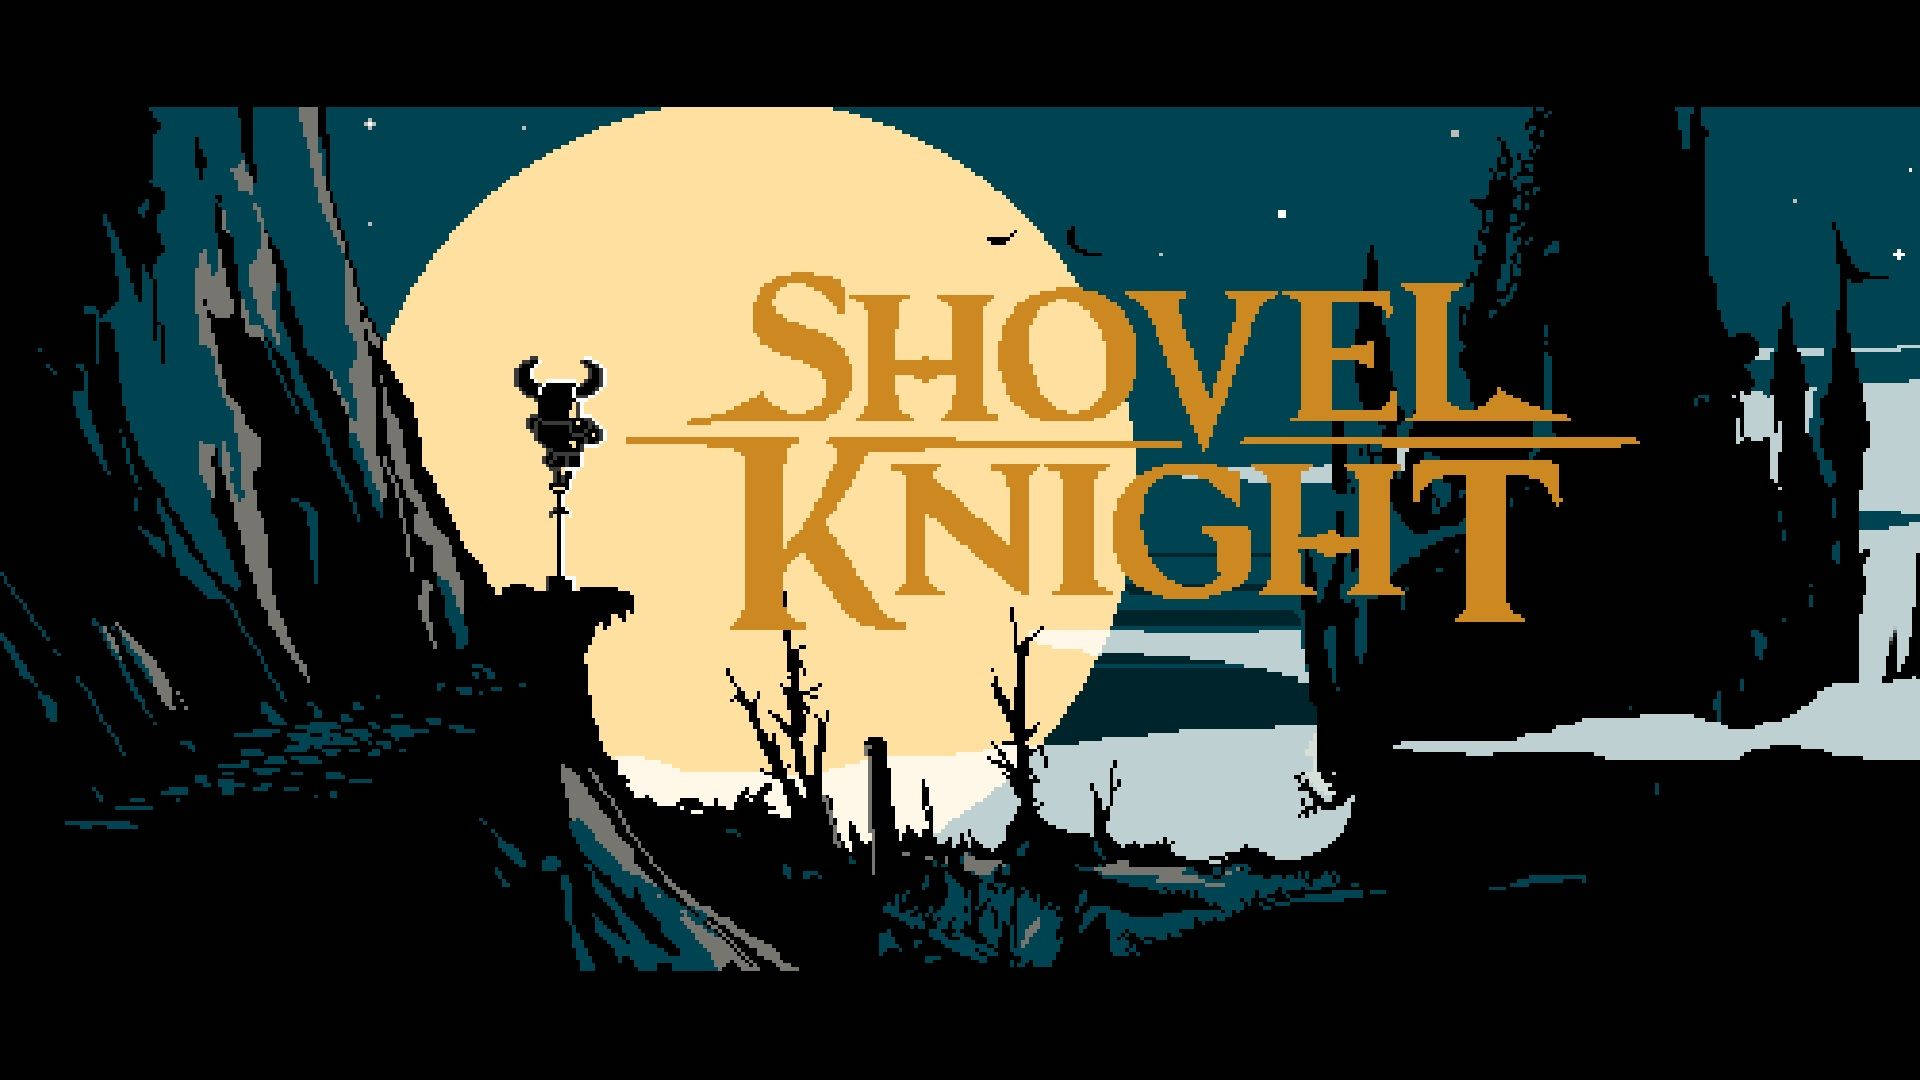 Shovel Knight Gold Title Texts Background